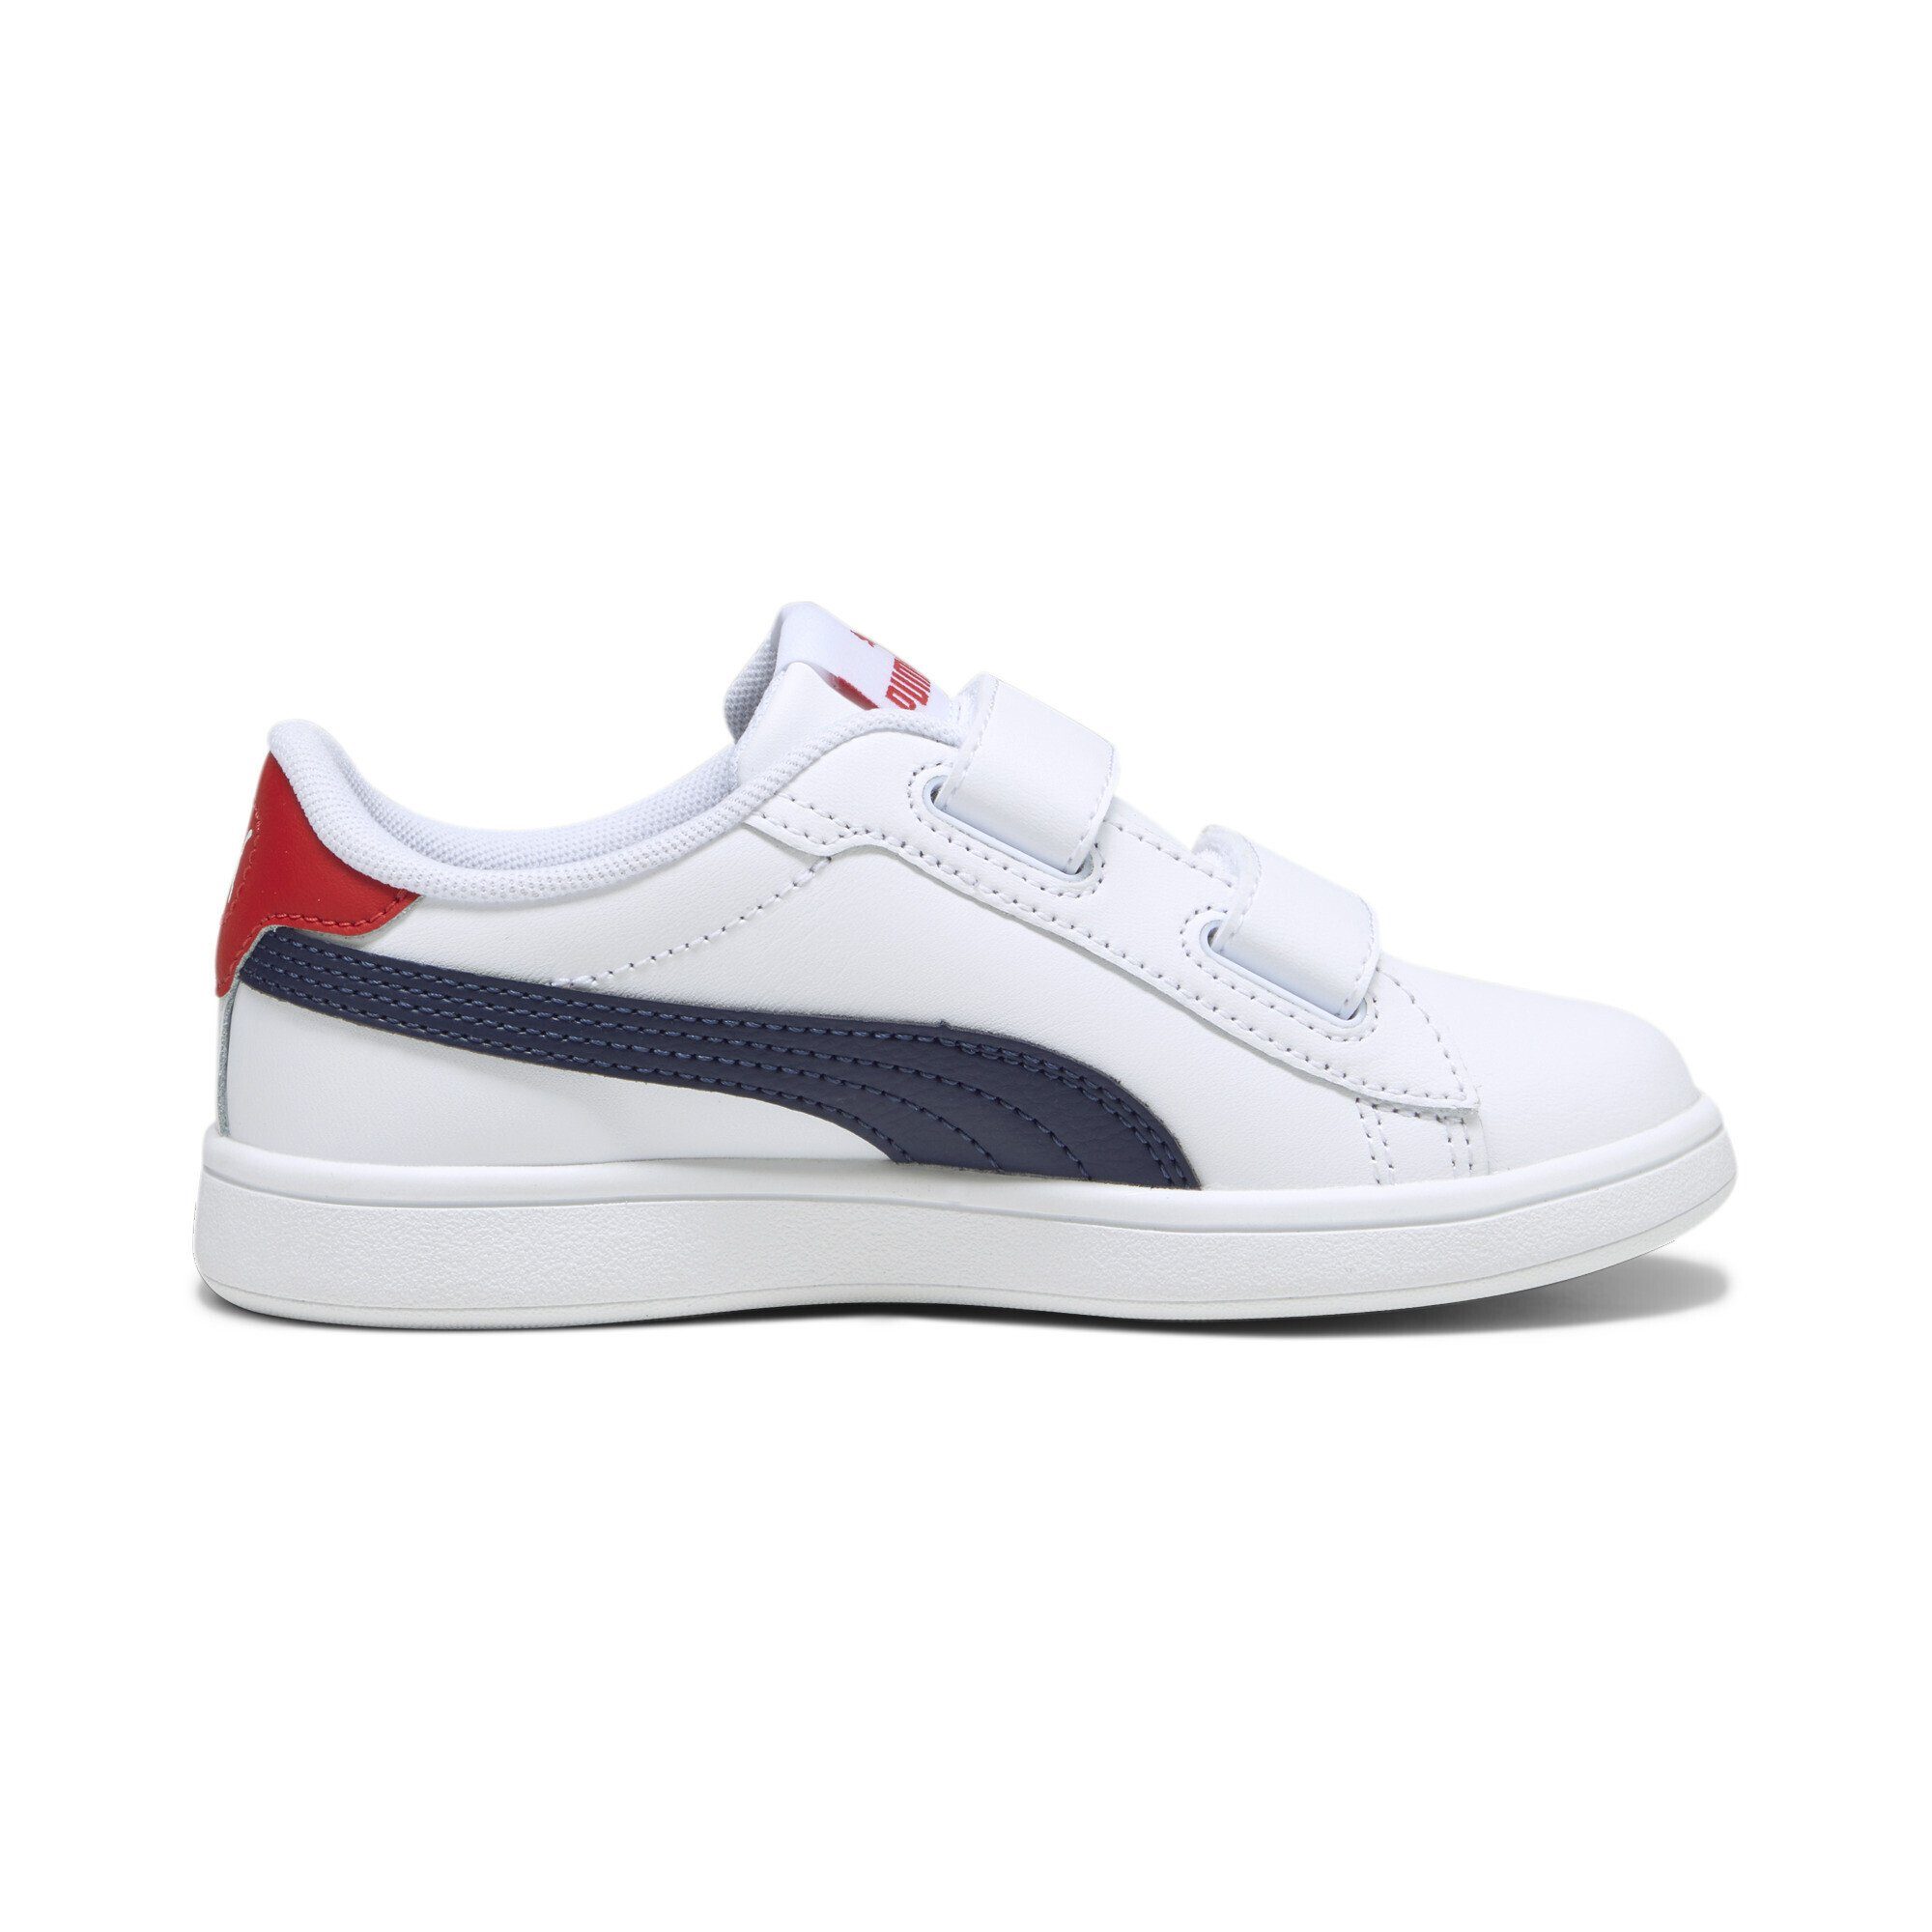 PUMA Smash Blue All White Leather Sneakers Navy 3.0 Time Sneaker Red For